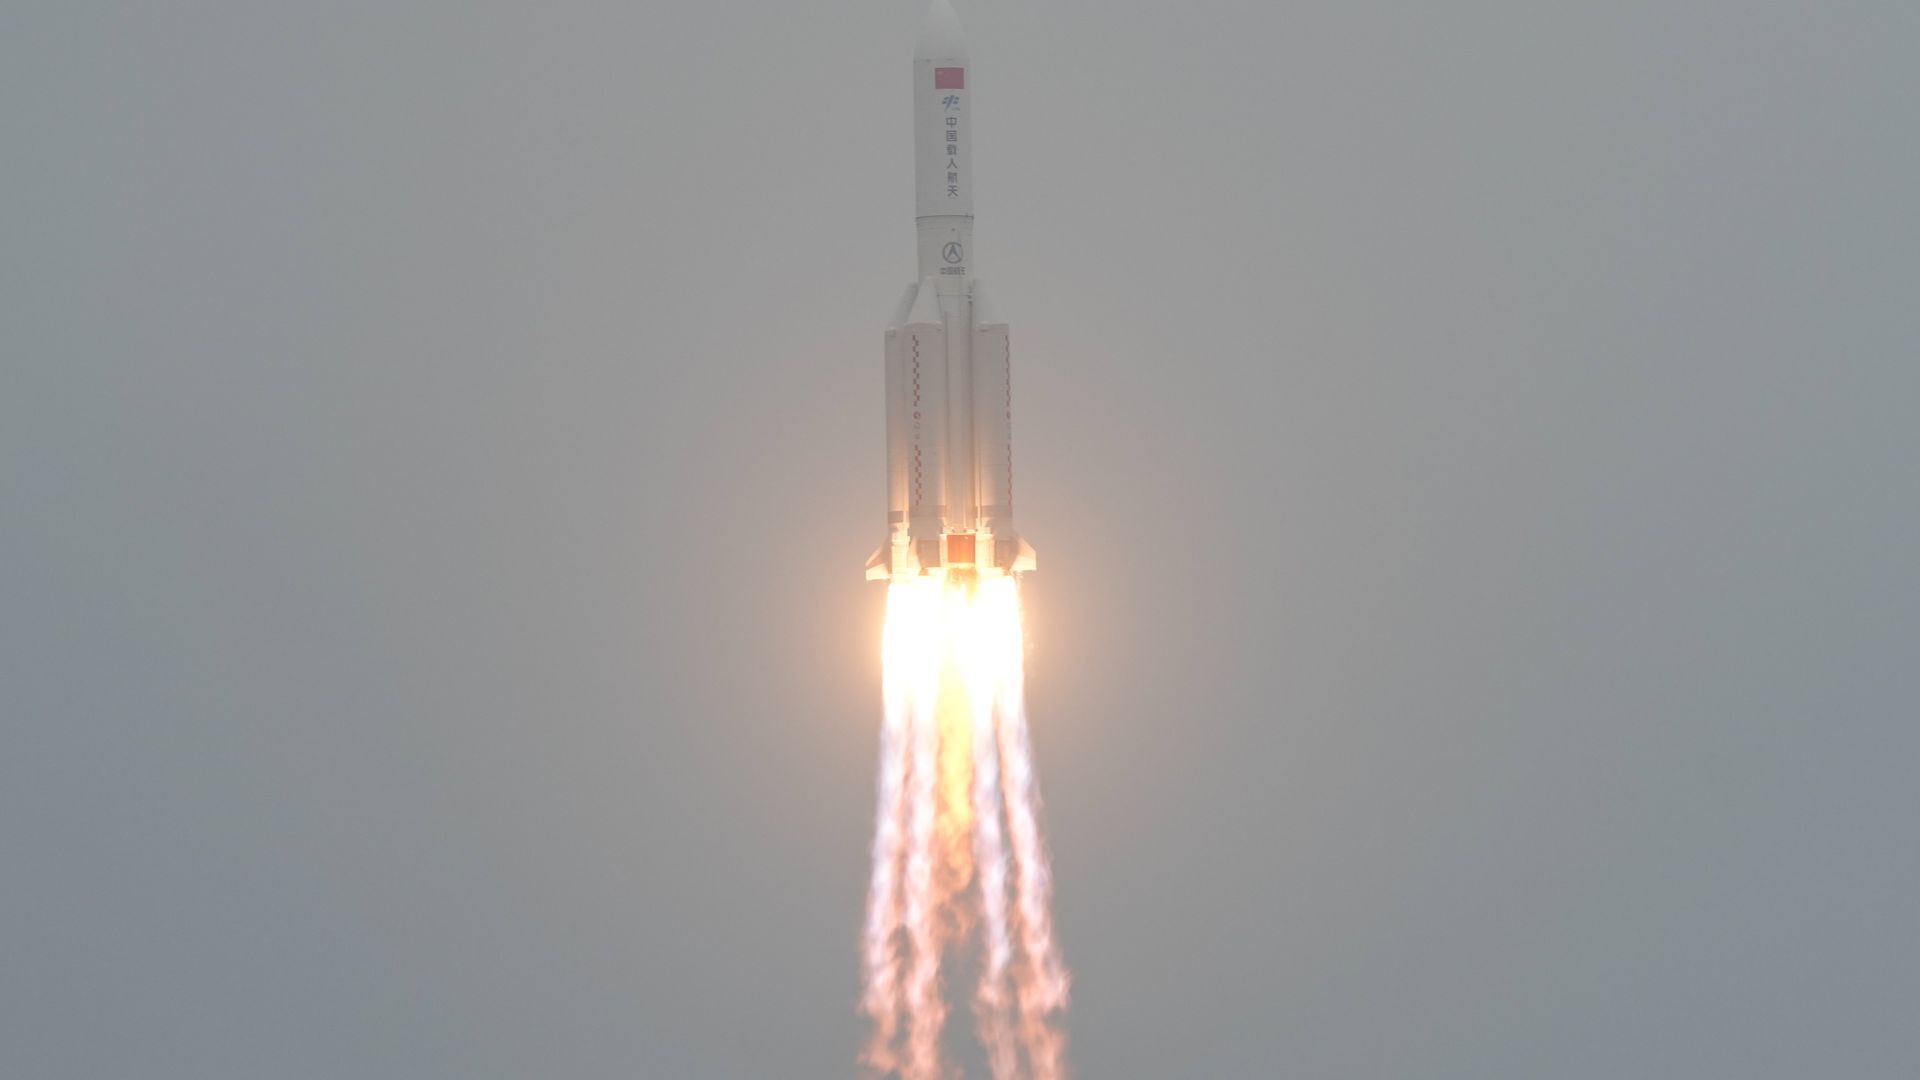  The Long March-5B Y2 rocket, carrying the Tianhe module, blasts off from the Wenchang Spacecraft Launch Site in south China's Hainan Province, April 29, 2021.